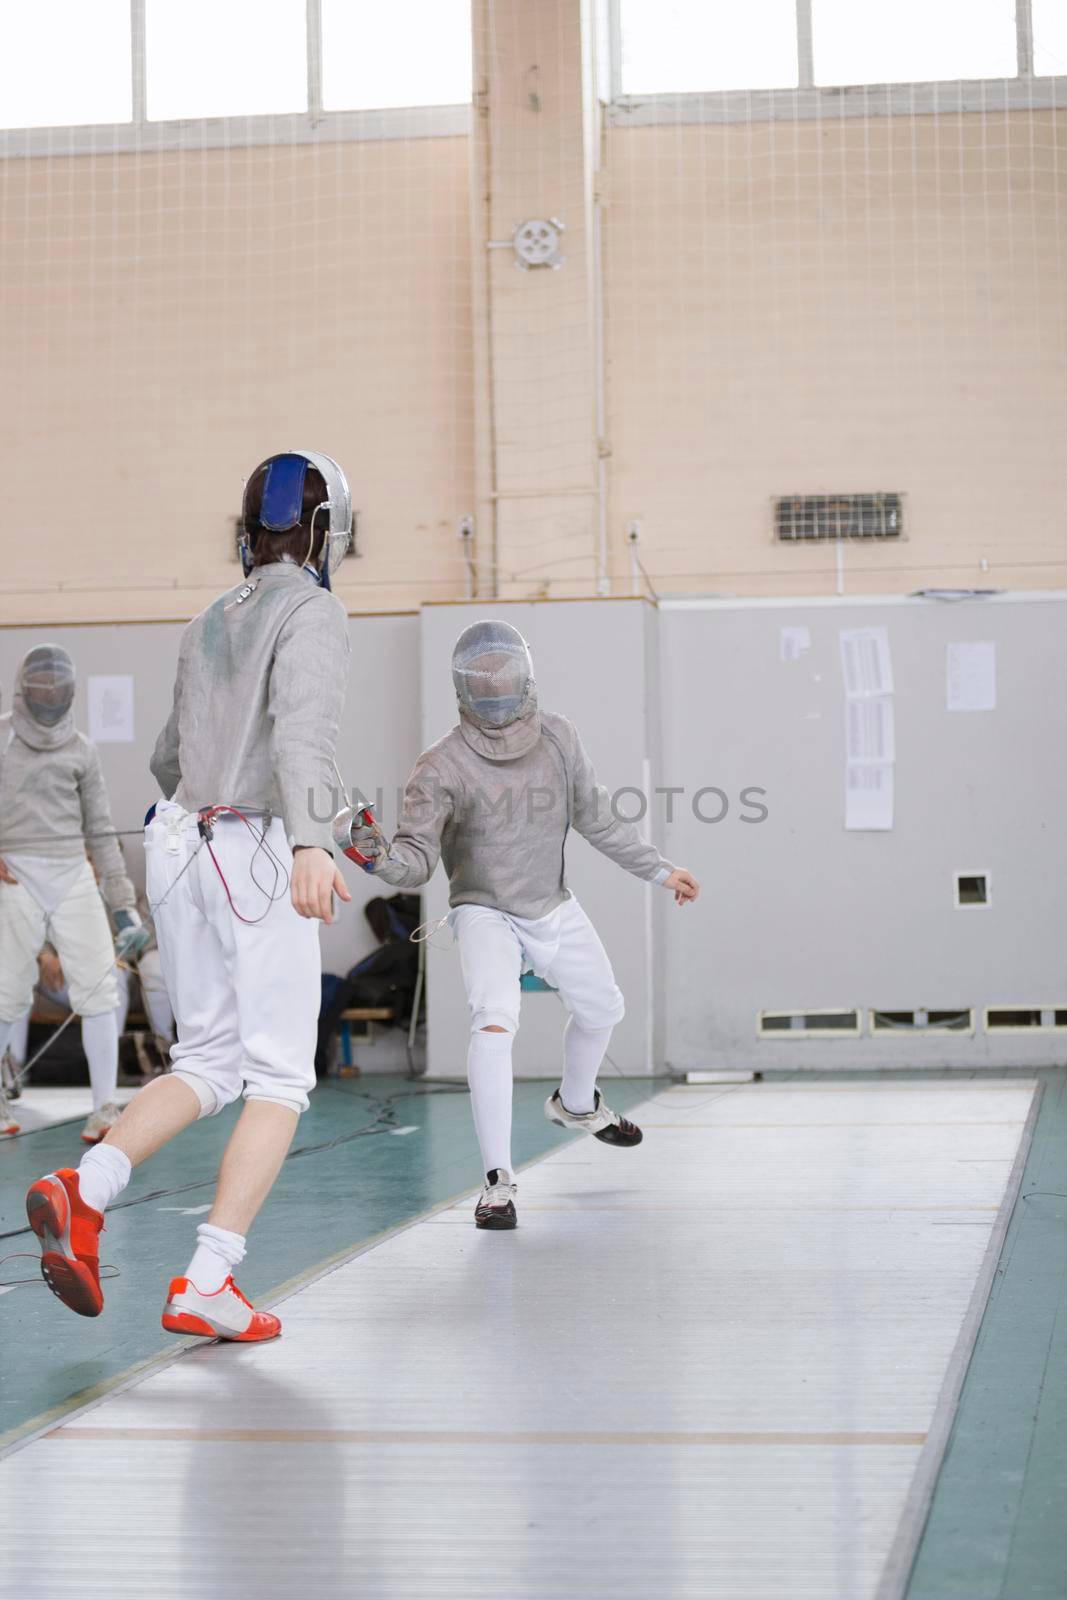 Young participants of the fencing tournament fighting in protective white clothes ,telephoto shot